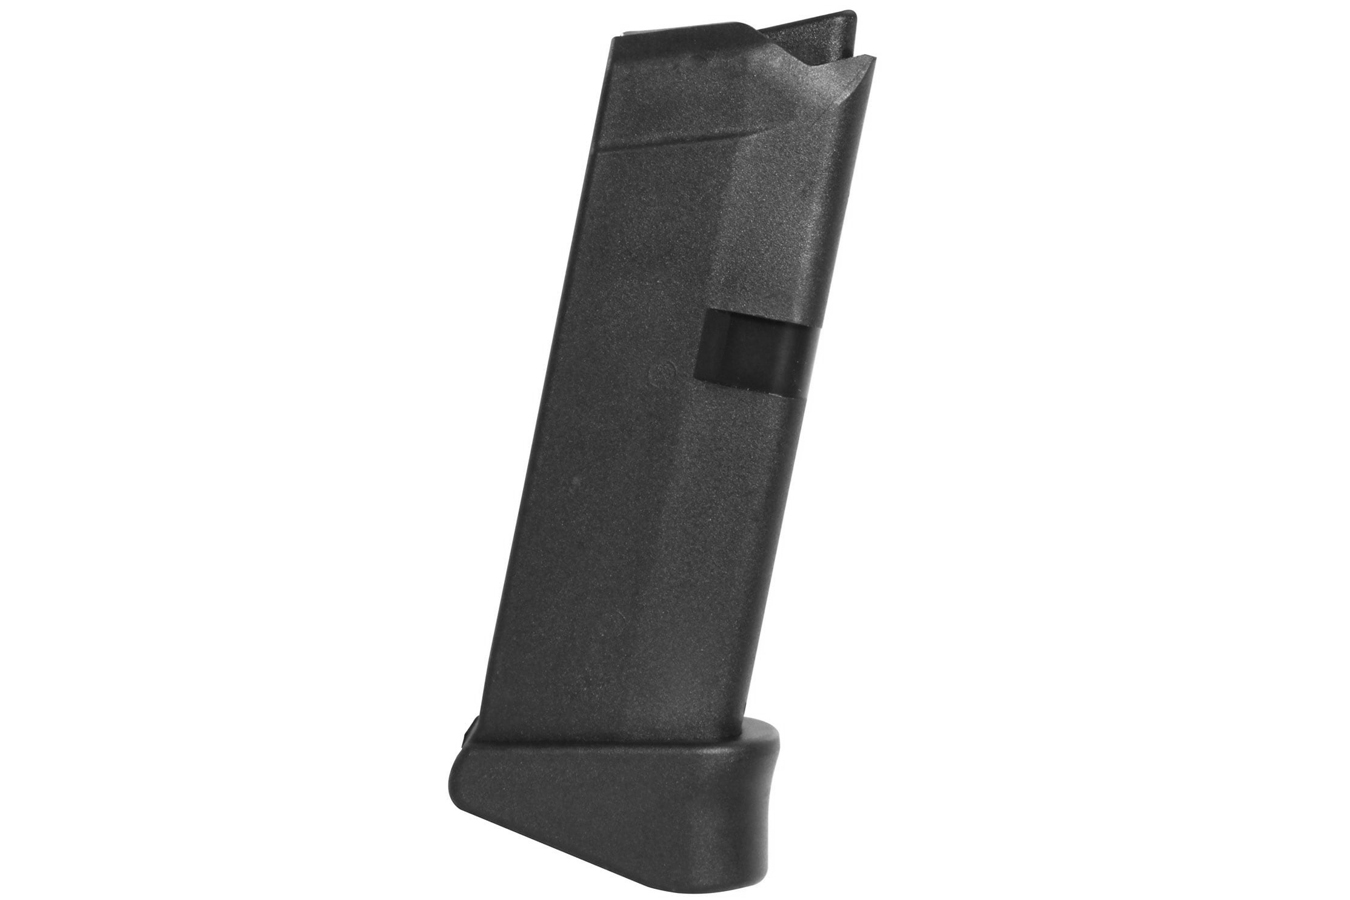 G43 9MM 6-ROUND MAGAZINE WITH EXTENSION